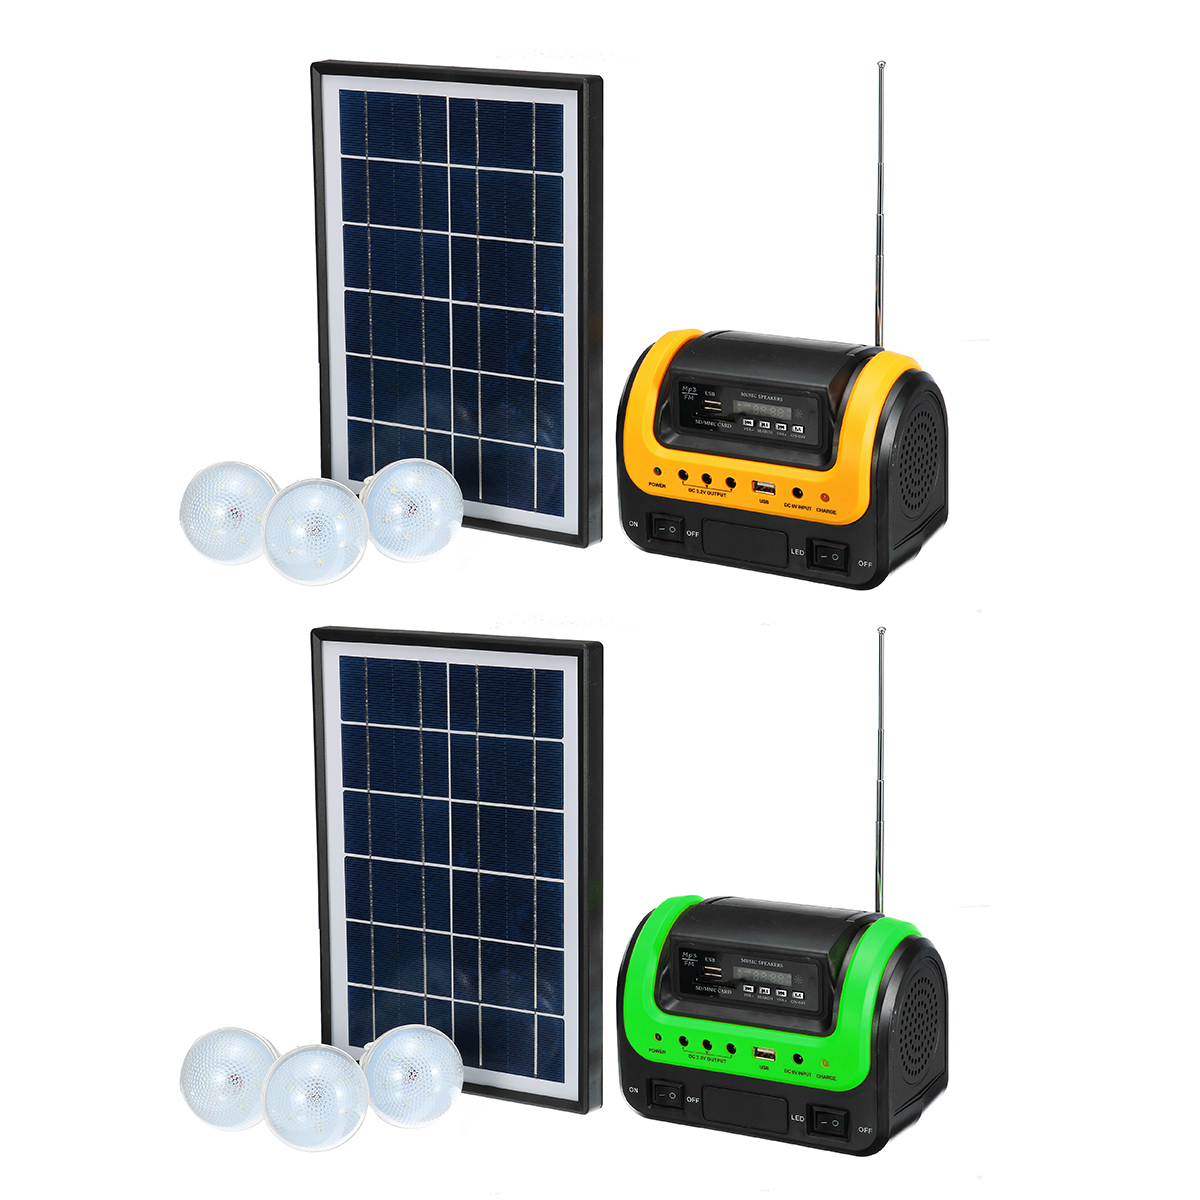 5W-Solar-Panel-Kit-DC-System-Energy-Electricity-Charge-Power-3-LED-Bulbs-Light-Indoor-Outdoor-Power--1764242-8